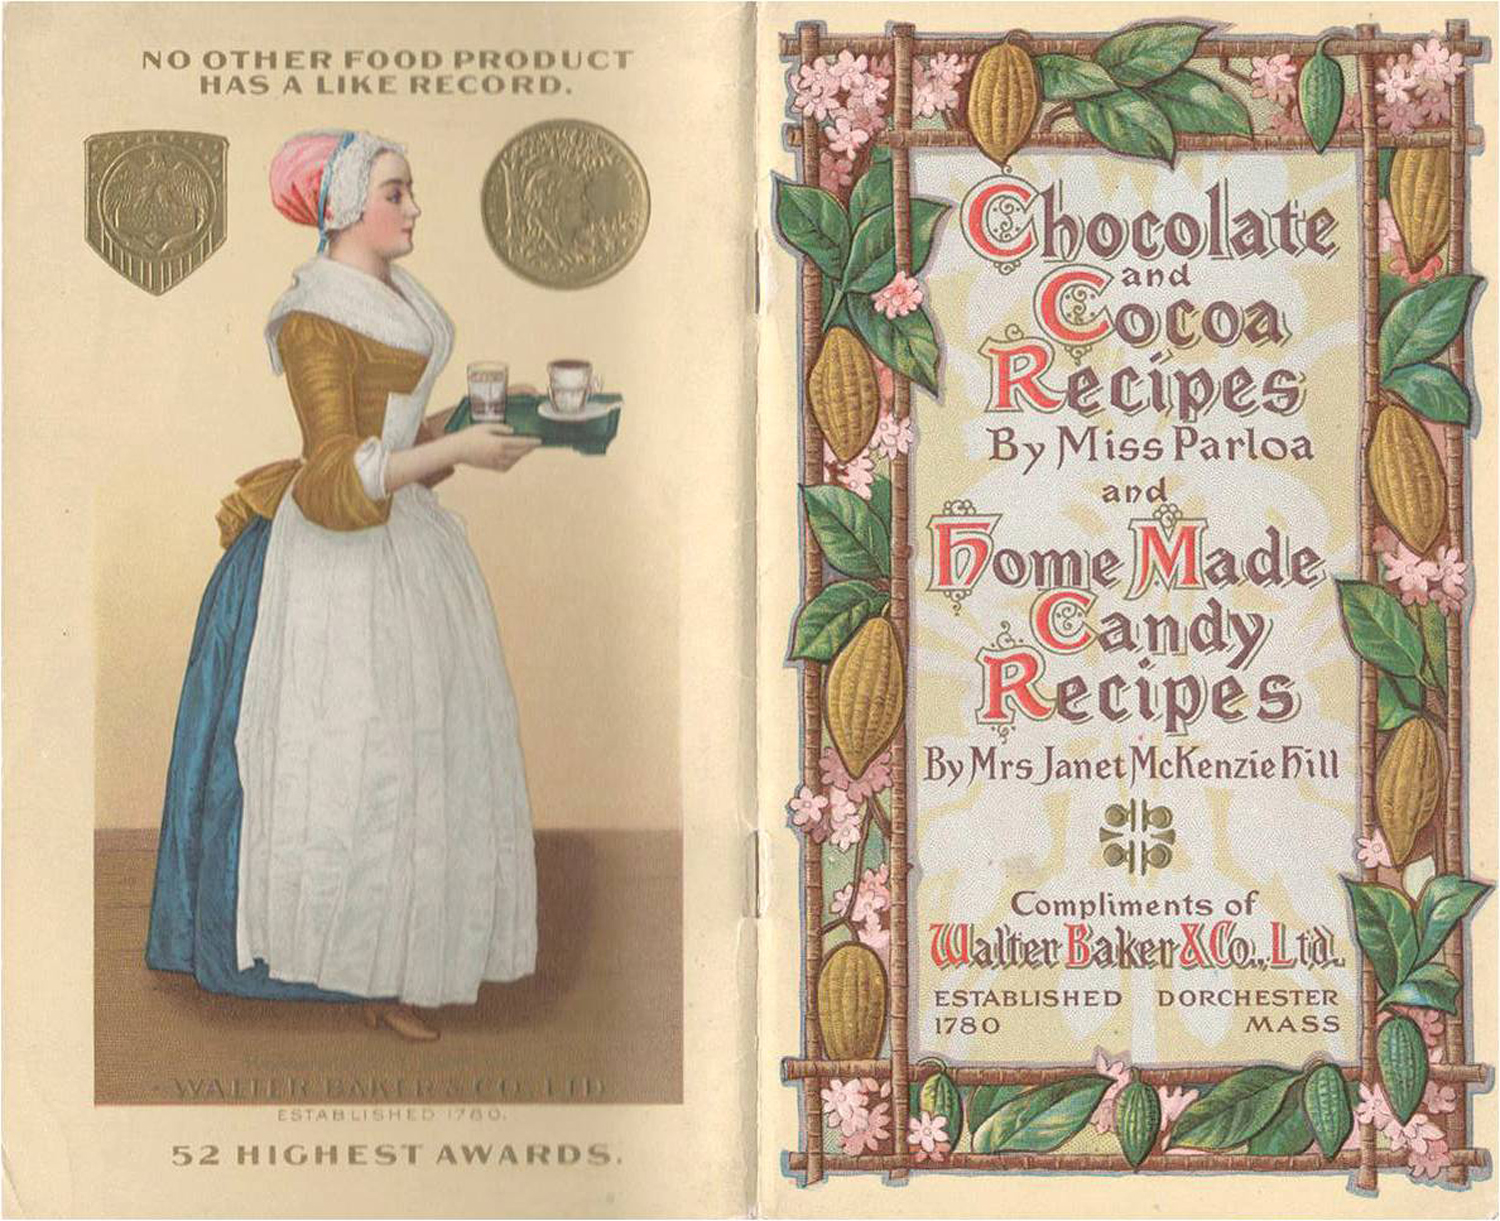 Front and back cover showing a woman in a cap and long apron carrying a tray with a cup of chocolate and a glass of water, and the title in an elaborate font surrounded by stylized cacao pods